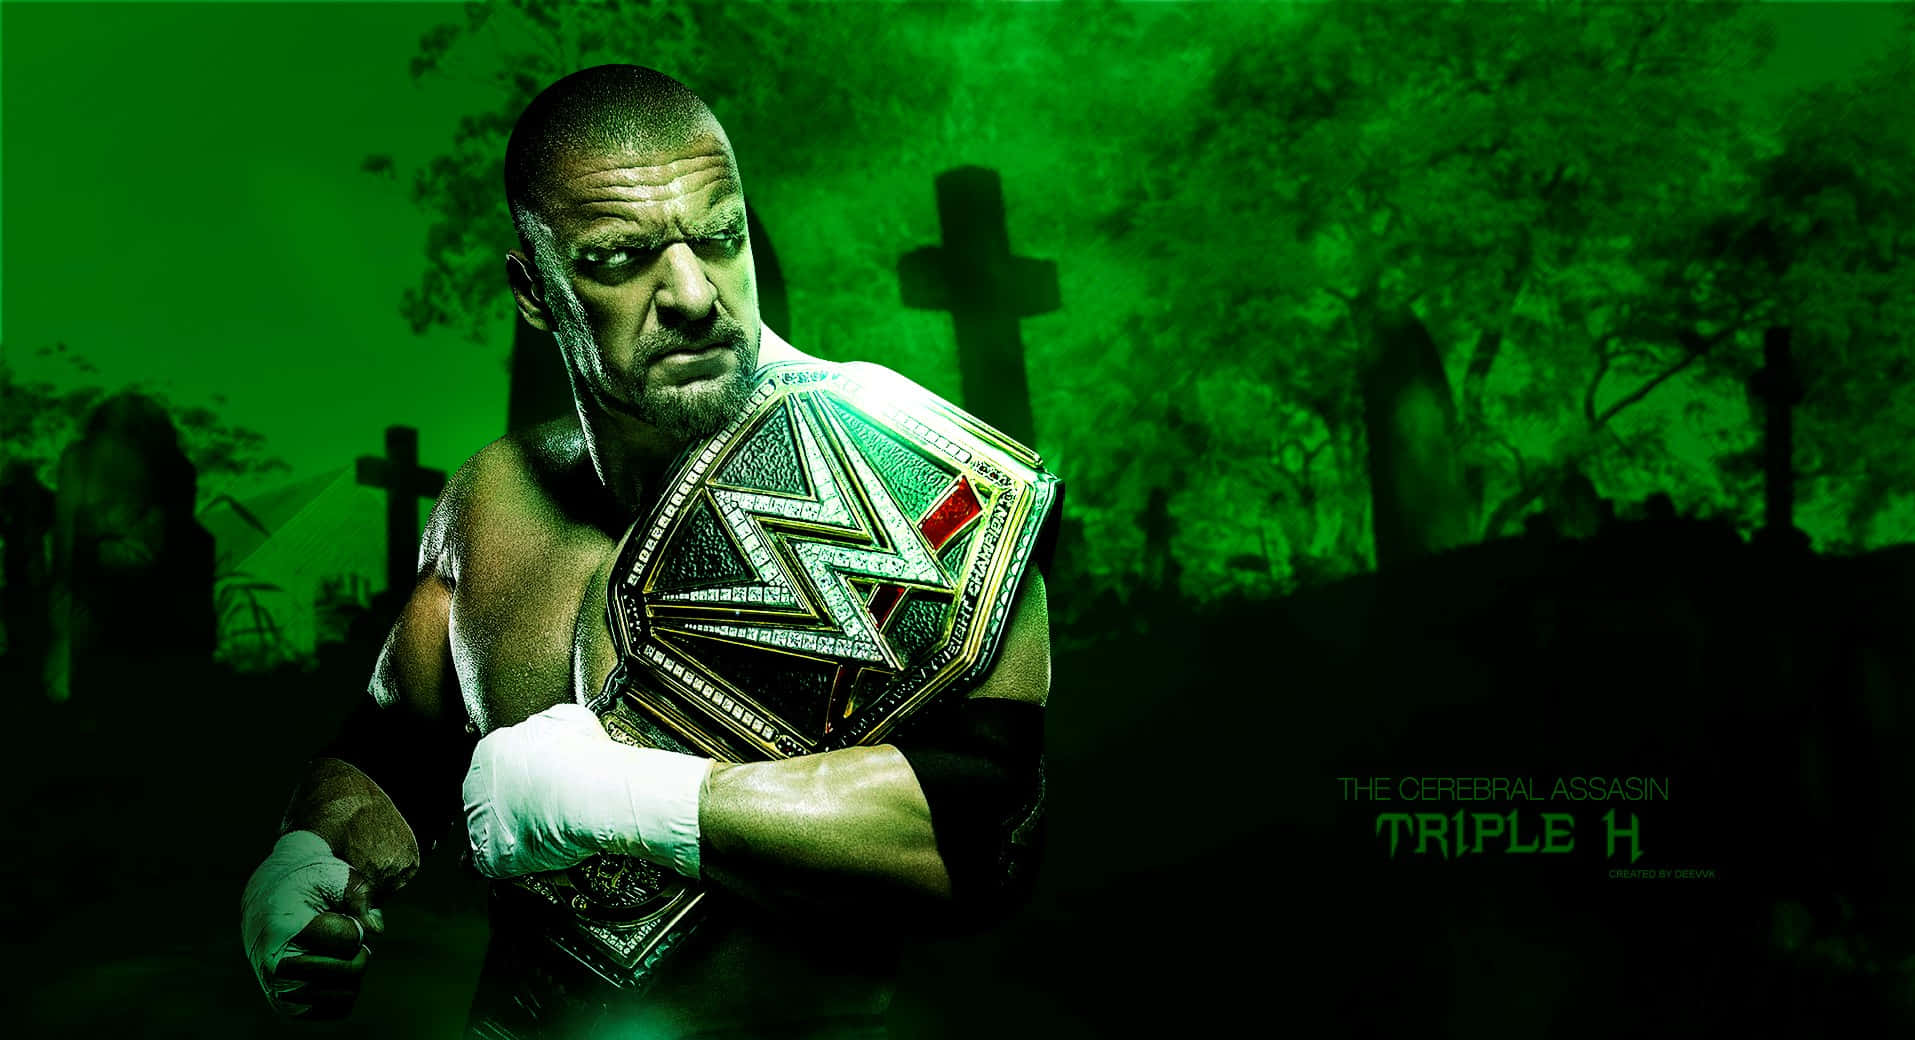 Triple H On Green Cemetery Graphic Wallpaper